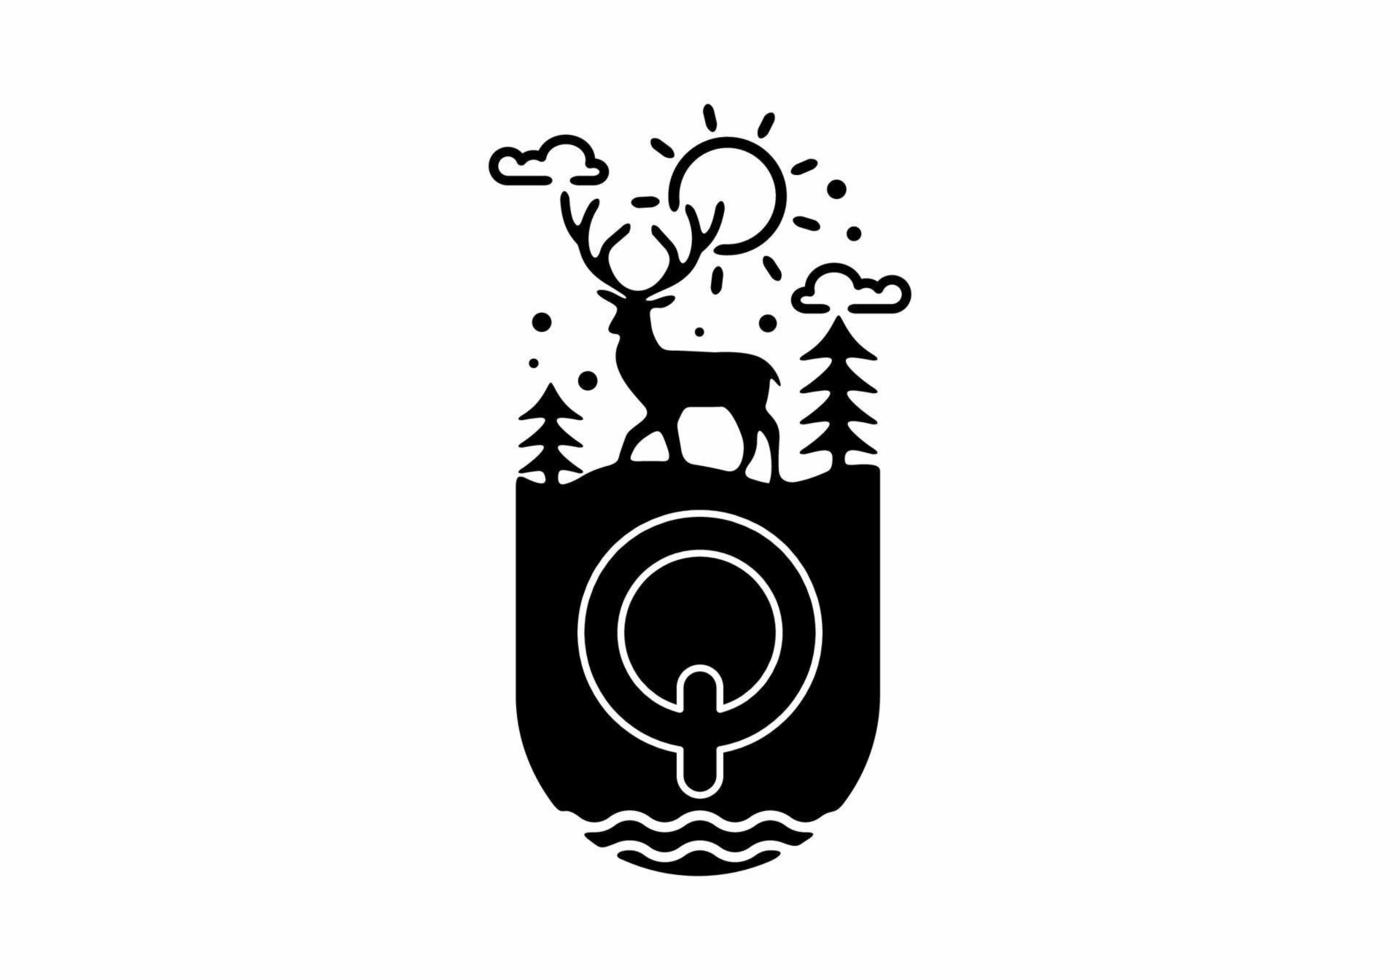 Black line art illustration of deer badge with Q initial name in the middle vector